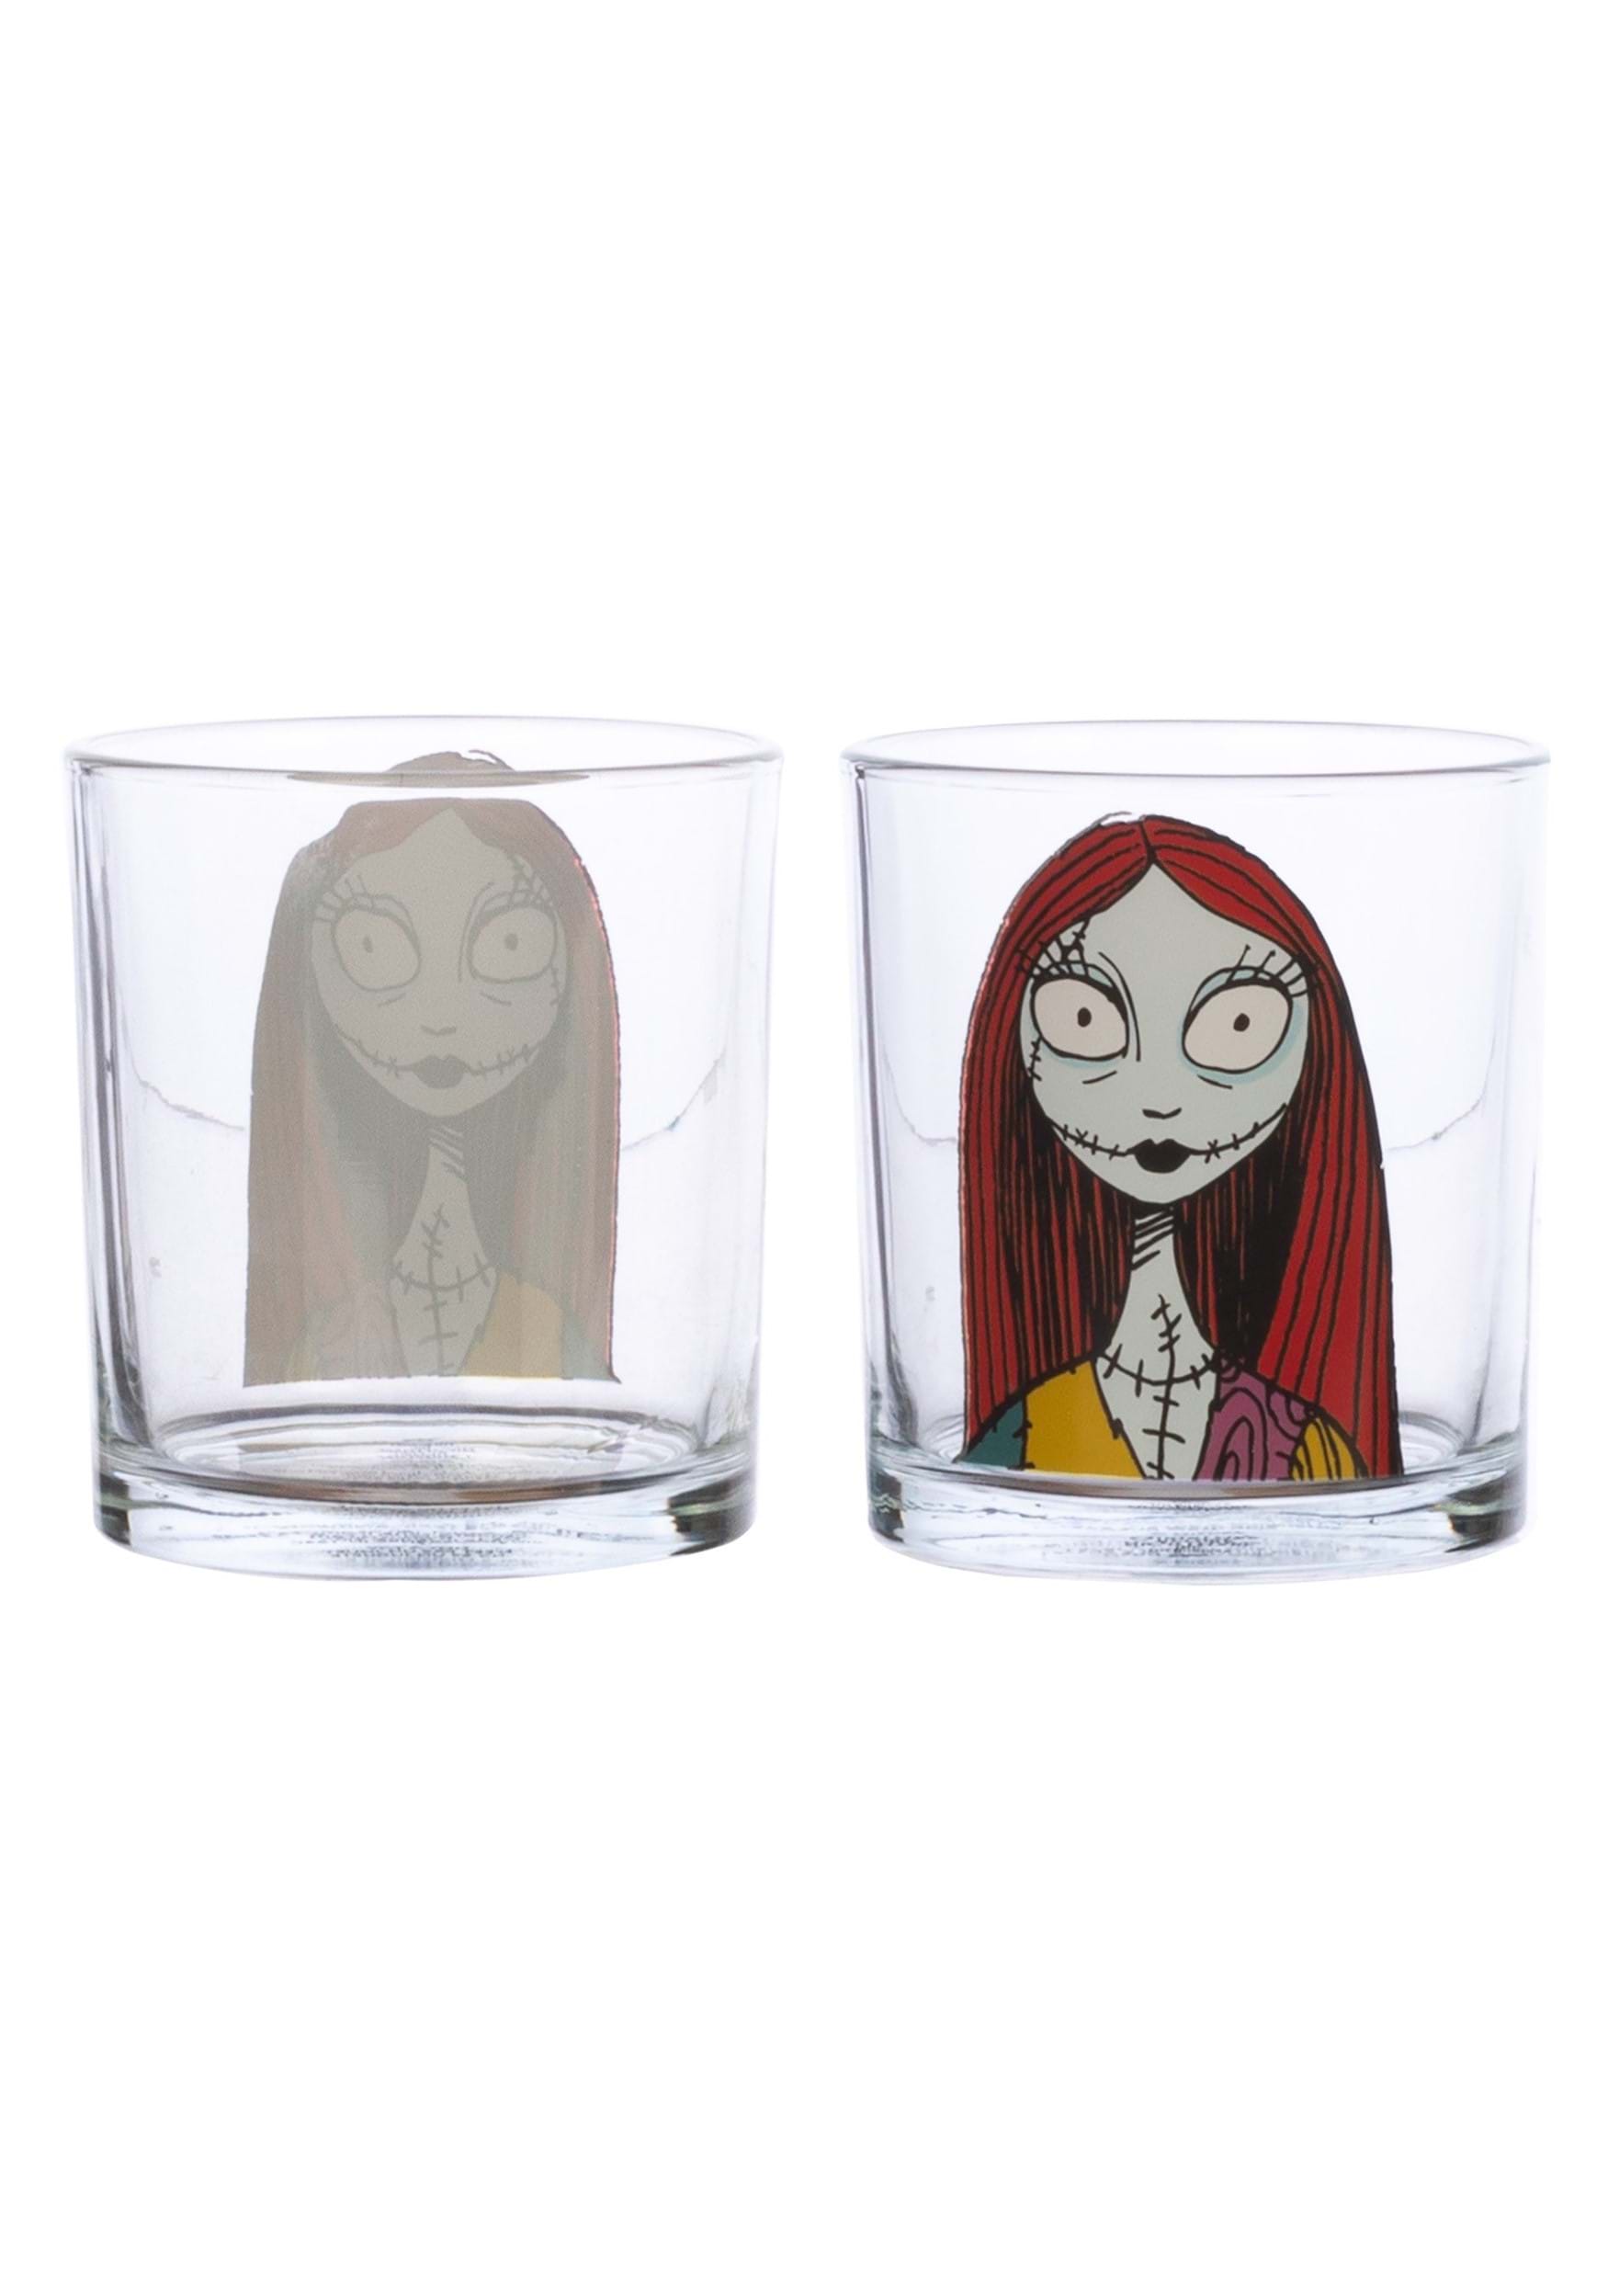 https://images.fun.com/products/90048/2-1-258838/set-of-4-disney-nightmare-before-christmas-10oz-glass-alt-2.jpg